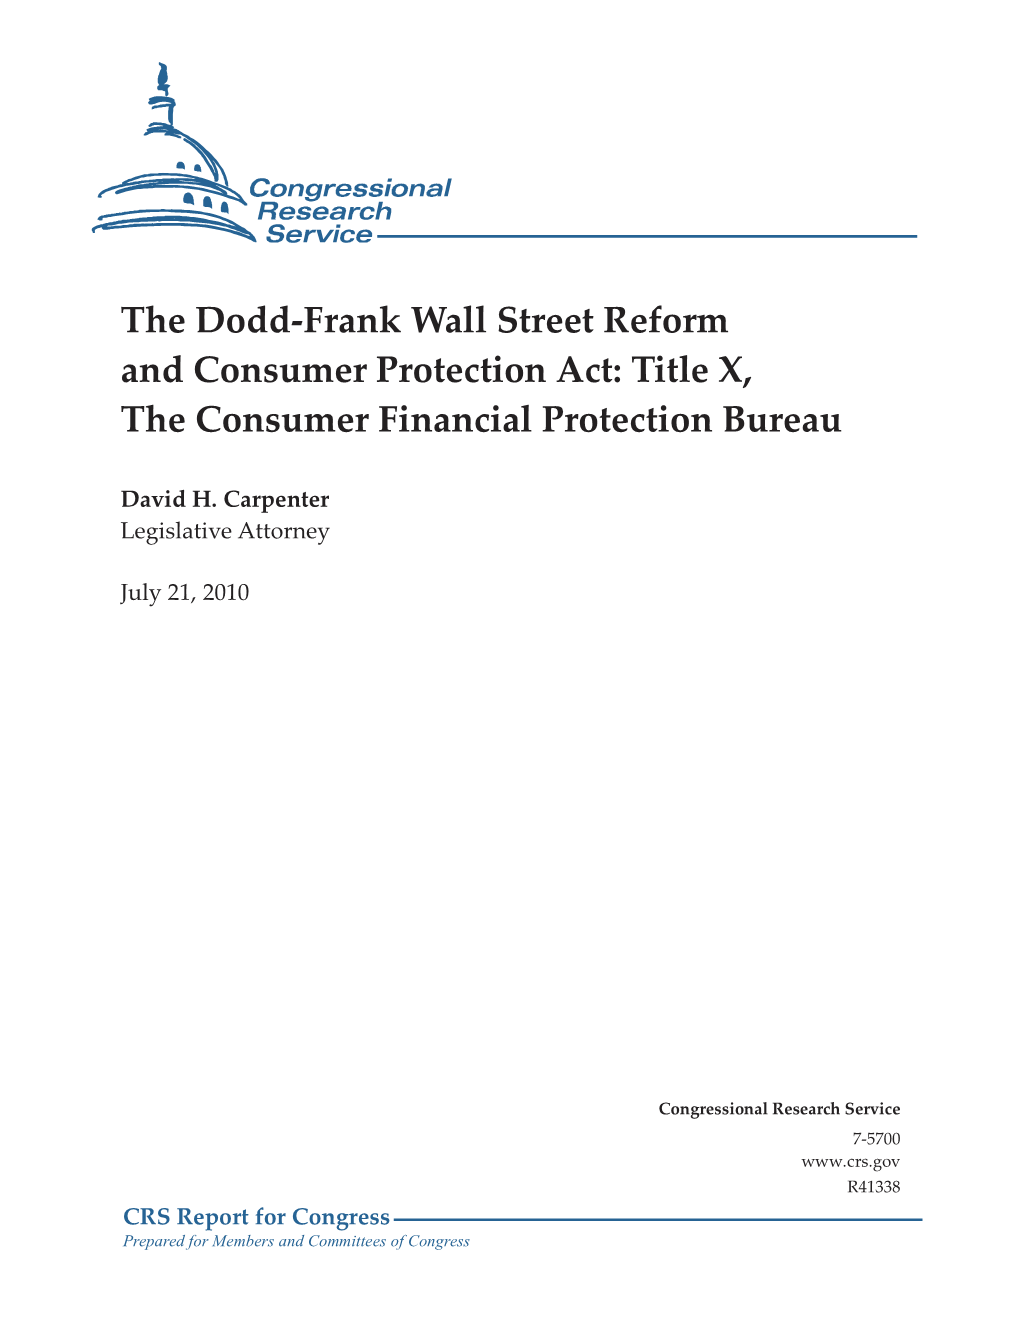 The Dodd-Frank Wall Street Reform and Consumer Protection Act: Title X, the Consumer Financial Protection Bureau